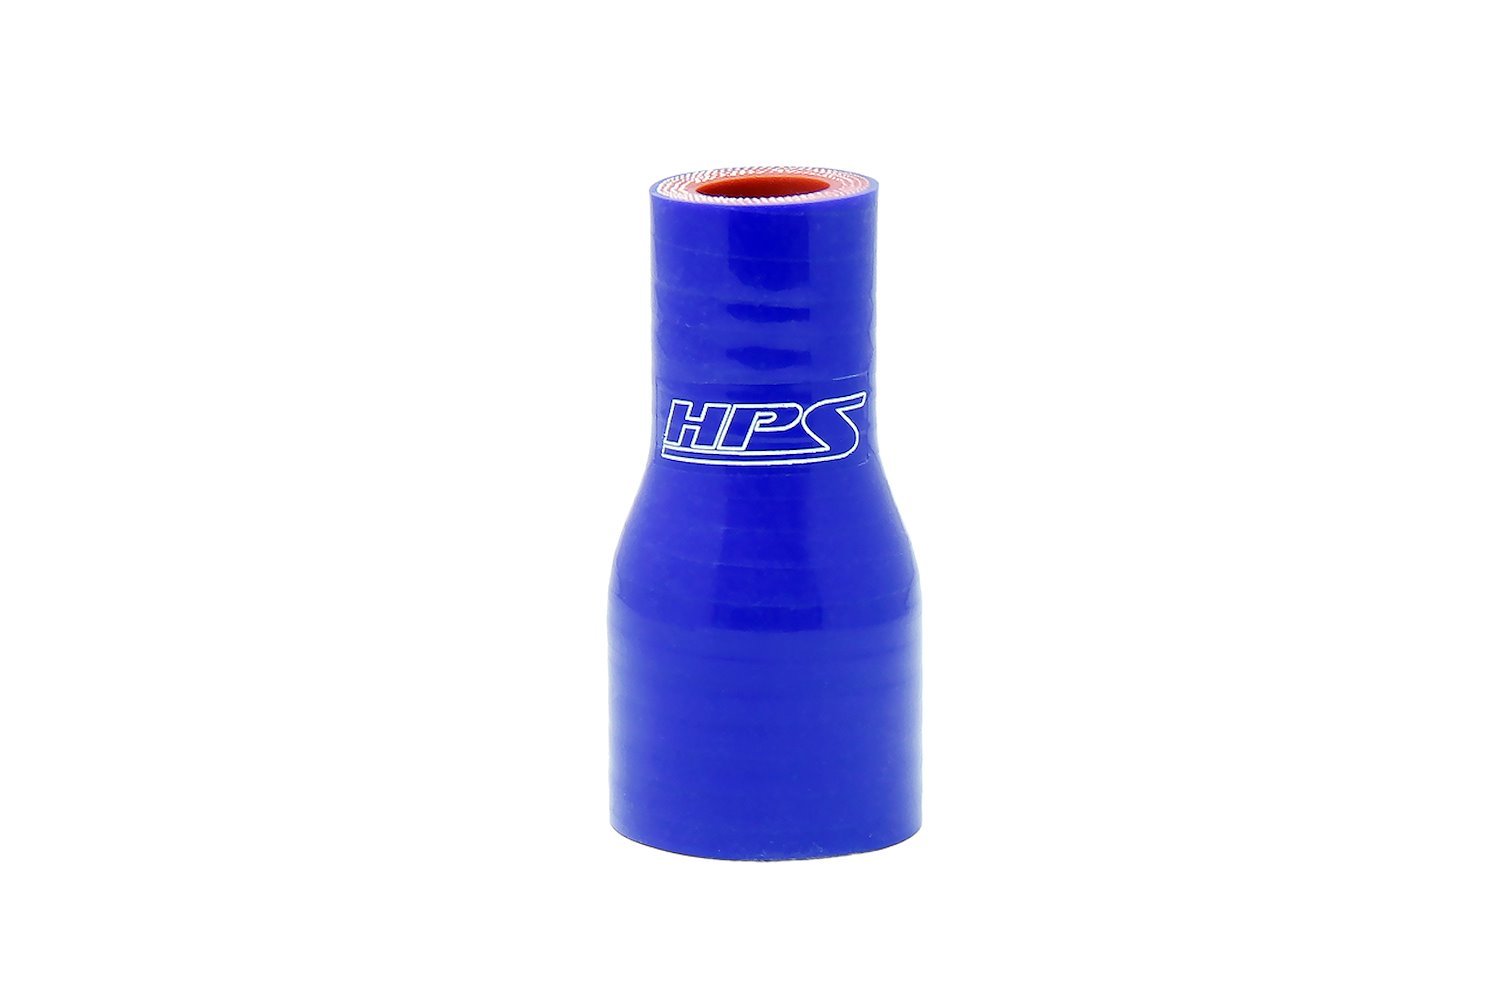 HTSR-075-100-BLUE Silicone Reducer Hose, High-Temp 4-Ply Reinforced, 3/4 in. - 1 in. ID, 3 in. Long, Blue